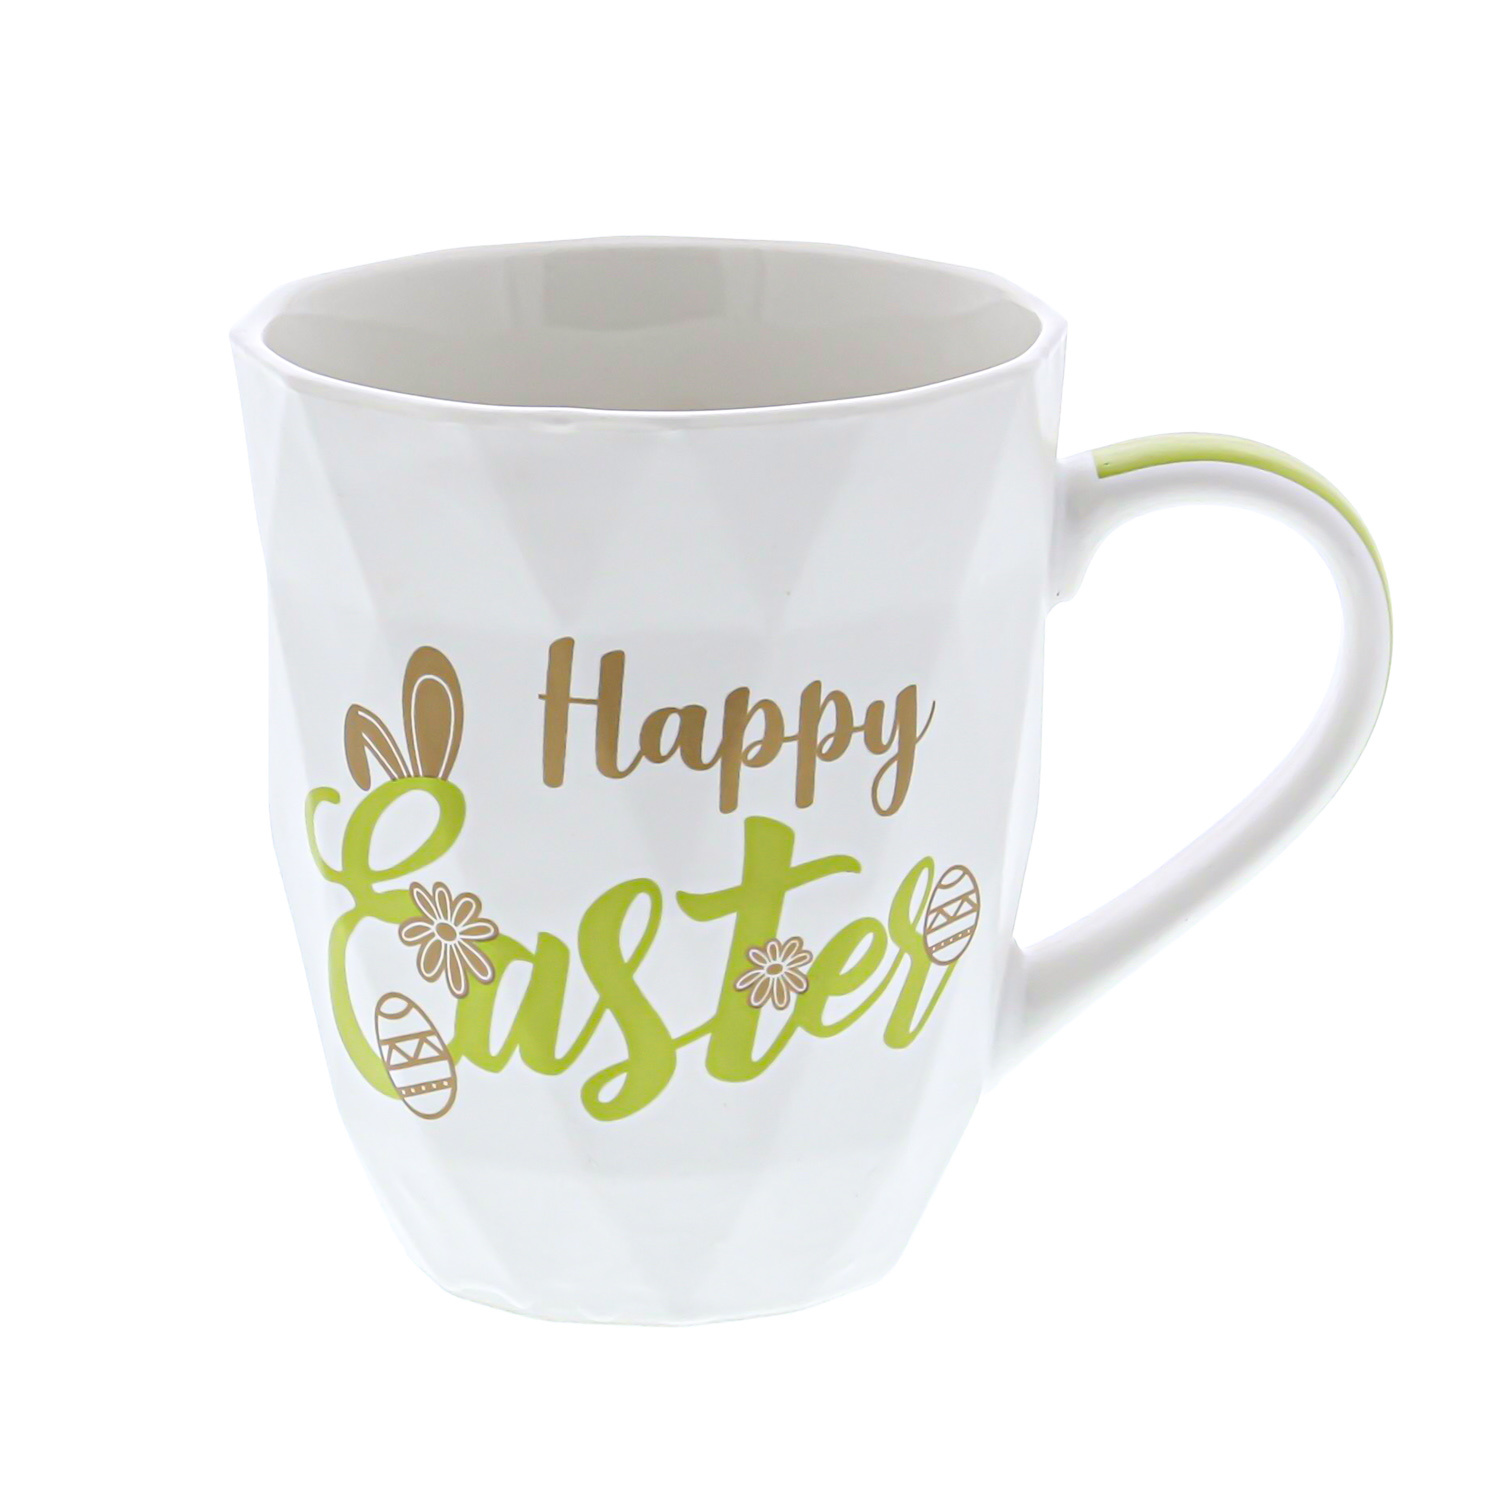 "Happy Easter" mug green / gold -120*86*103 mm - 12 pieces